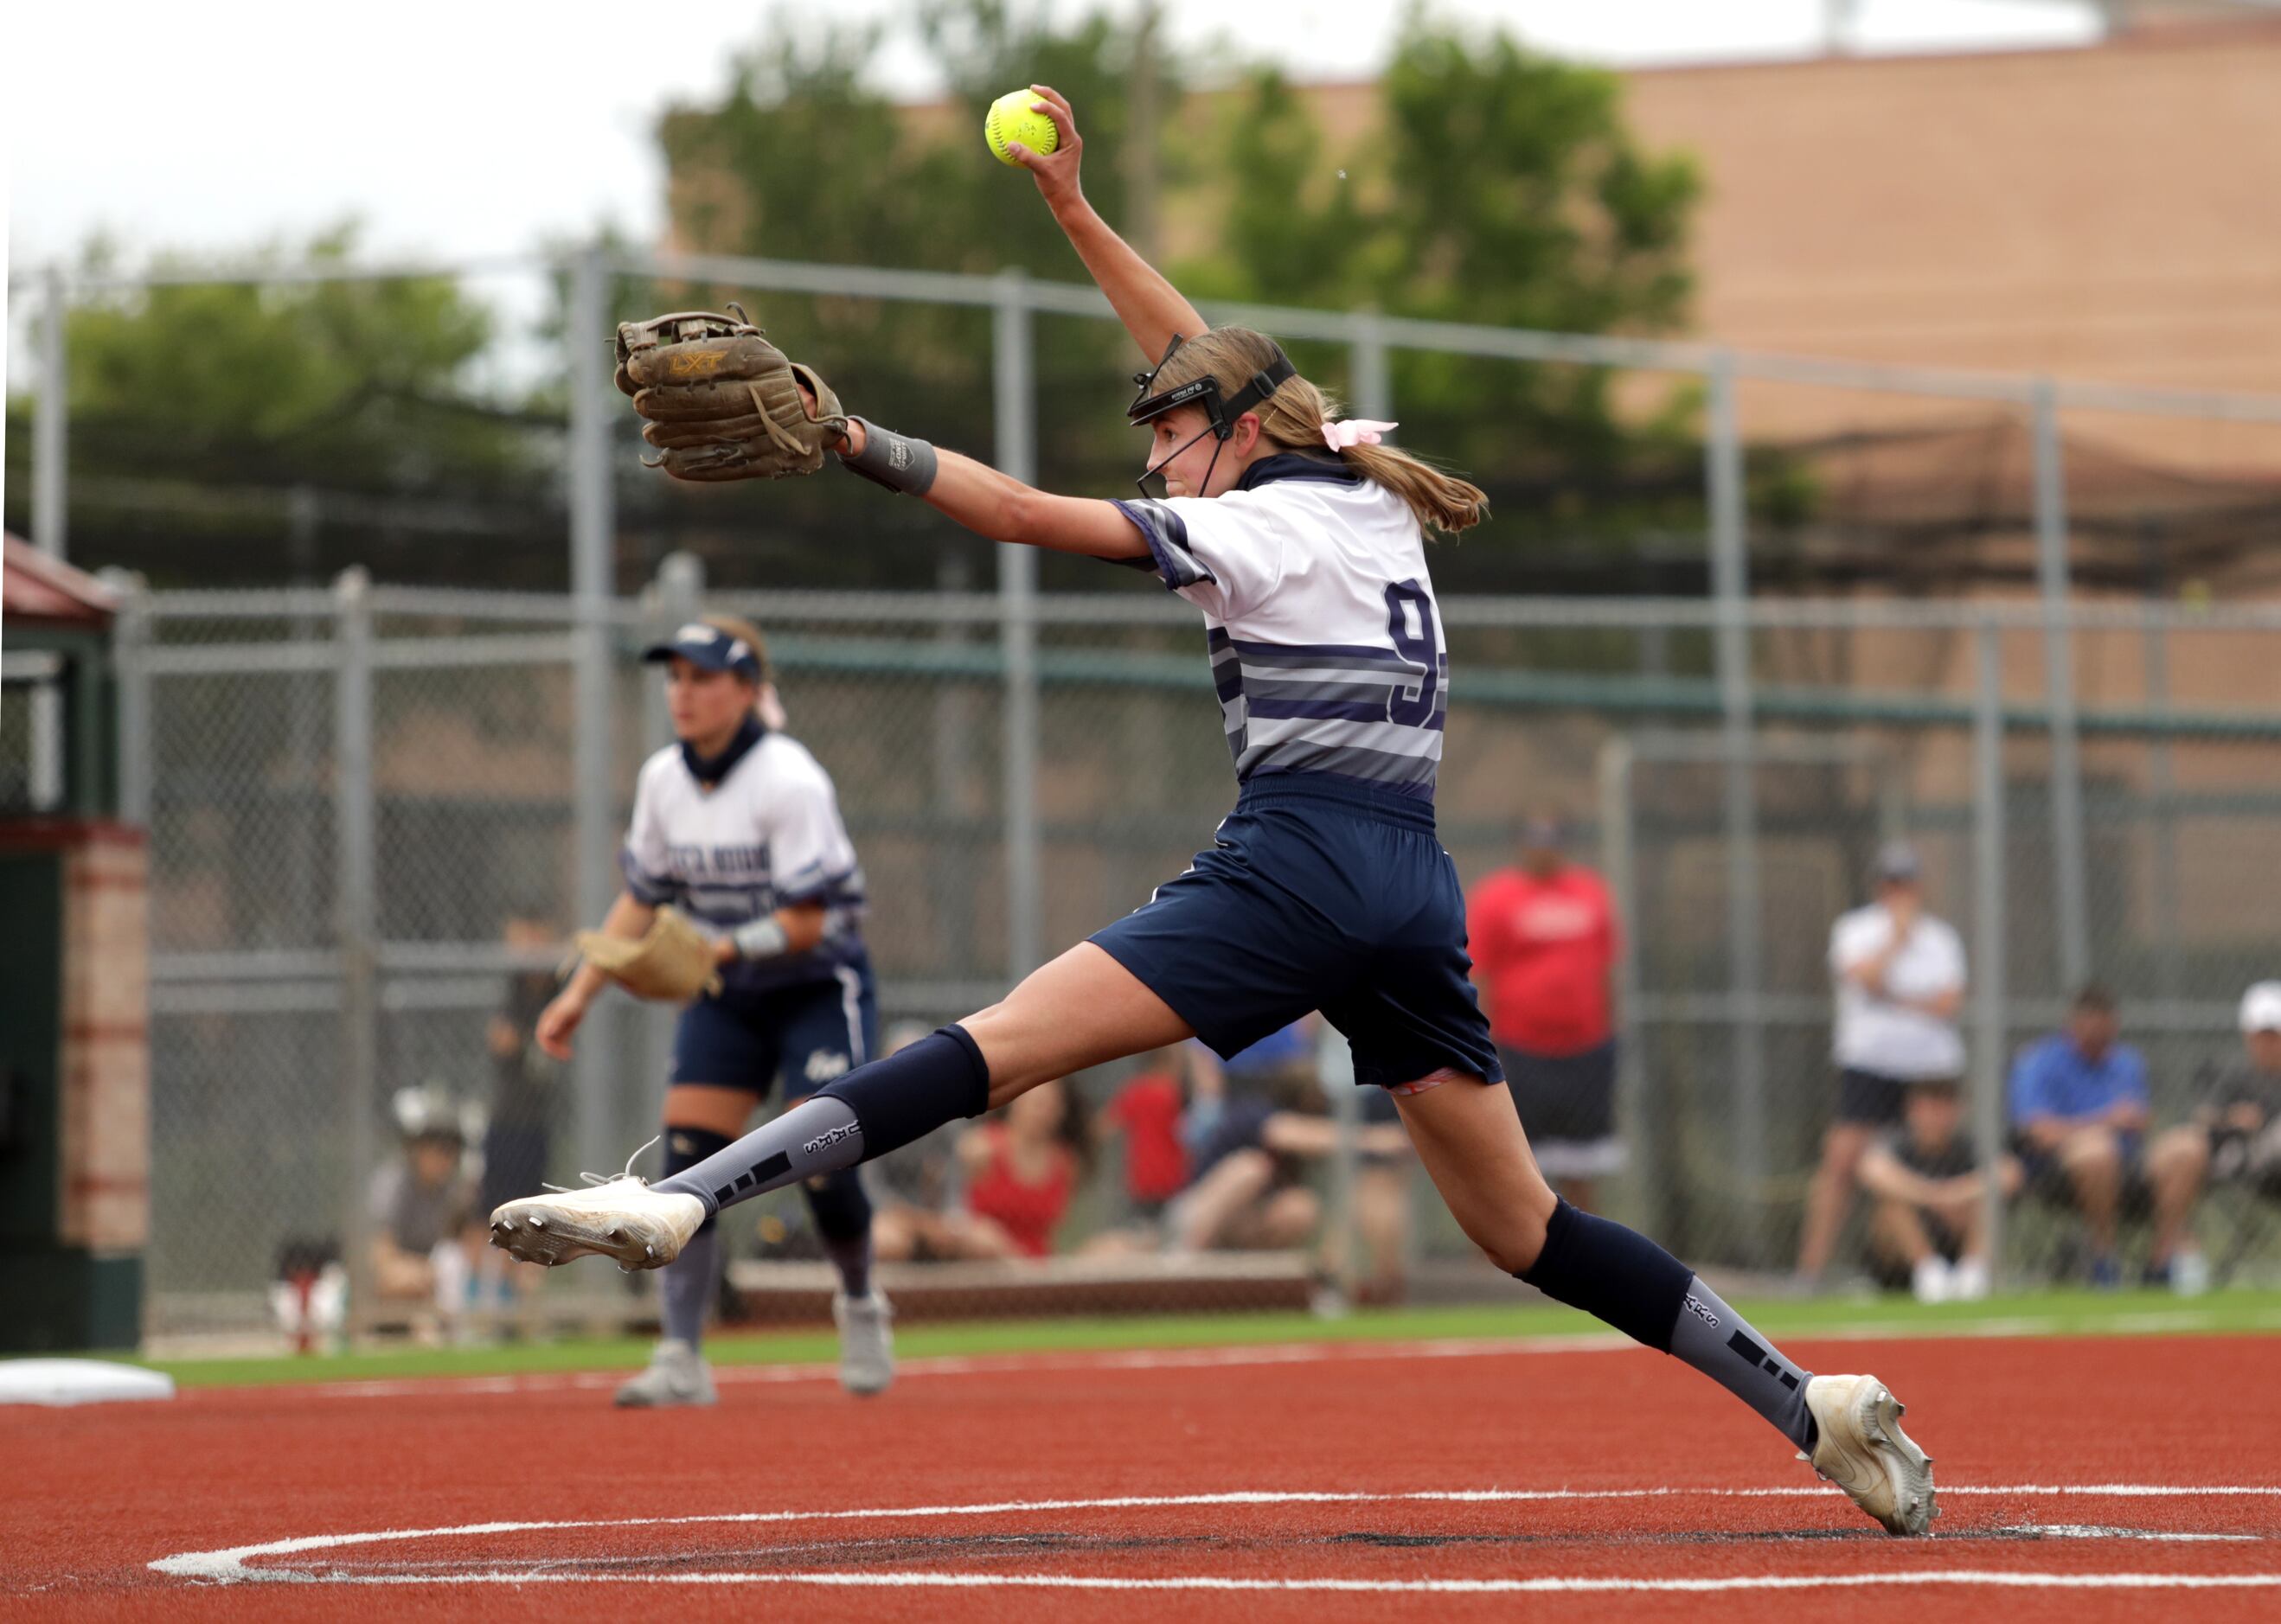 Flower Mound High School player #9, Abigail Jennings, pitches during a softball game against...